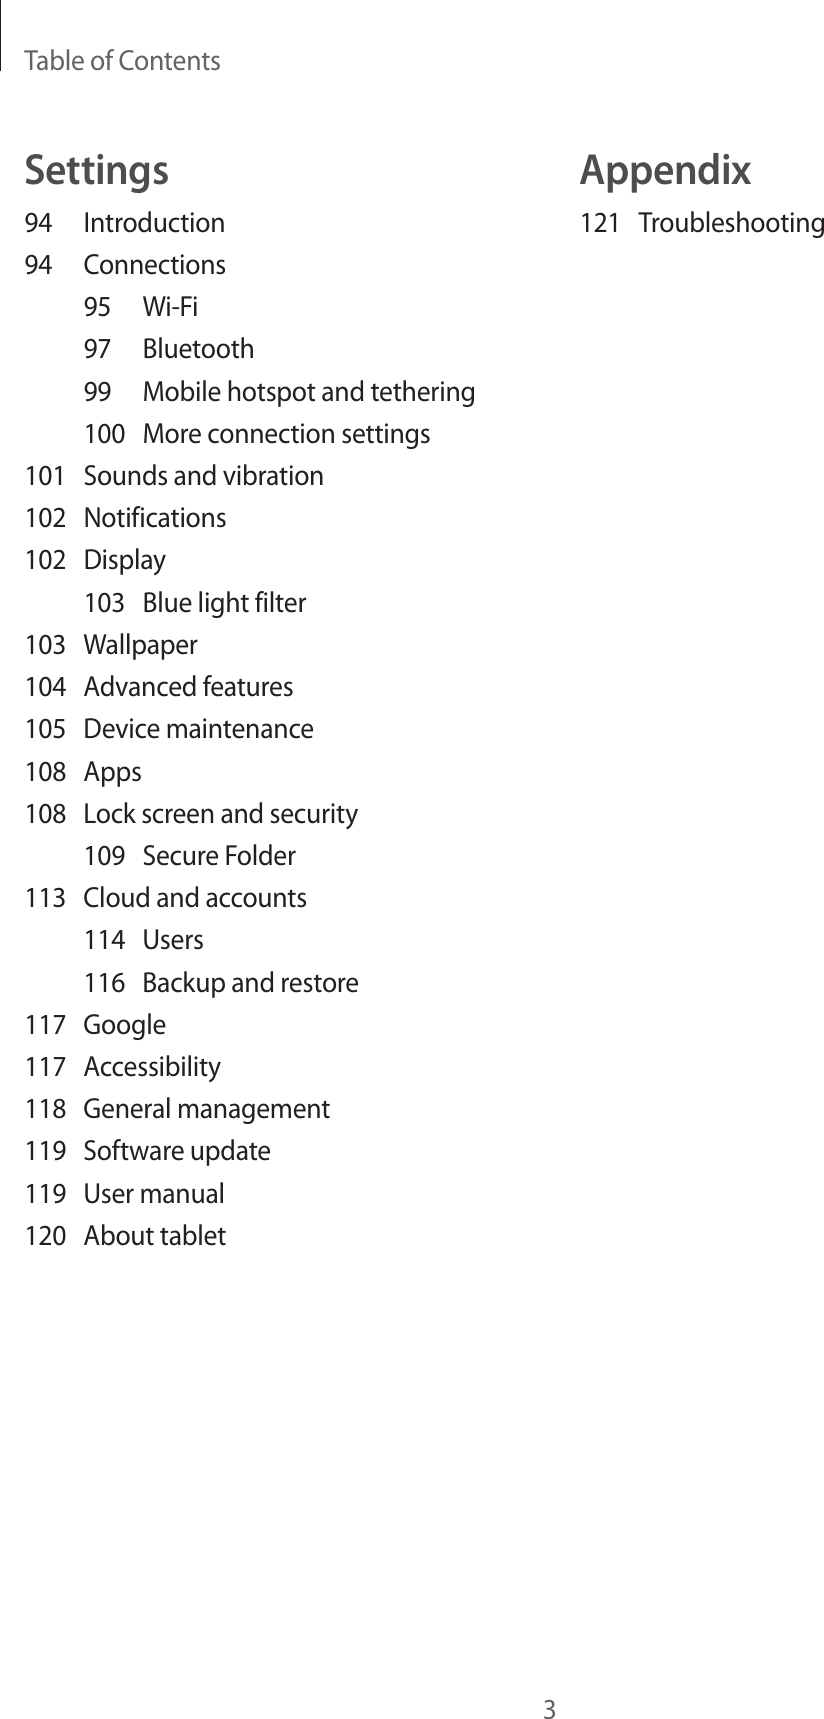 Table of Contents3Appendix121 TroubleshootingSettings94 Introduction94 Connections95 Wi-Fi97 Bluetooth99  Mobile hotspot and tethering100  More connection settings101  Sounds and vibration102 Notifications102 Display103  Blue light filter103 Wallpaper104  Advanced features105  Device maintenance108 Apps108  Lock screen and security109  Secure Folder113  Cloud and accounts114 Users116  Backup and restore117 Google117 Accessibility118  General management119  Software update119  User manual120  About tablet